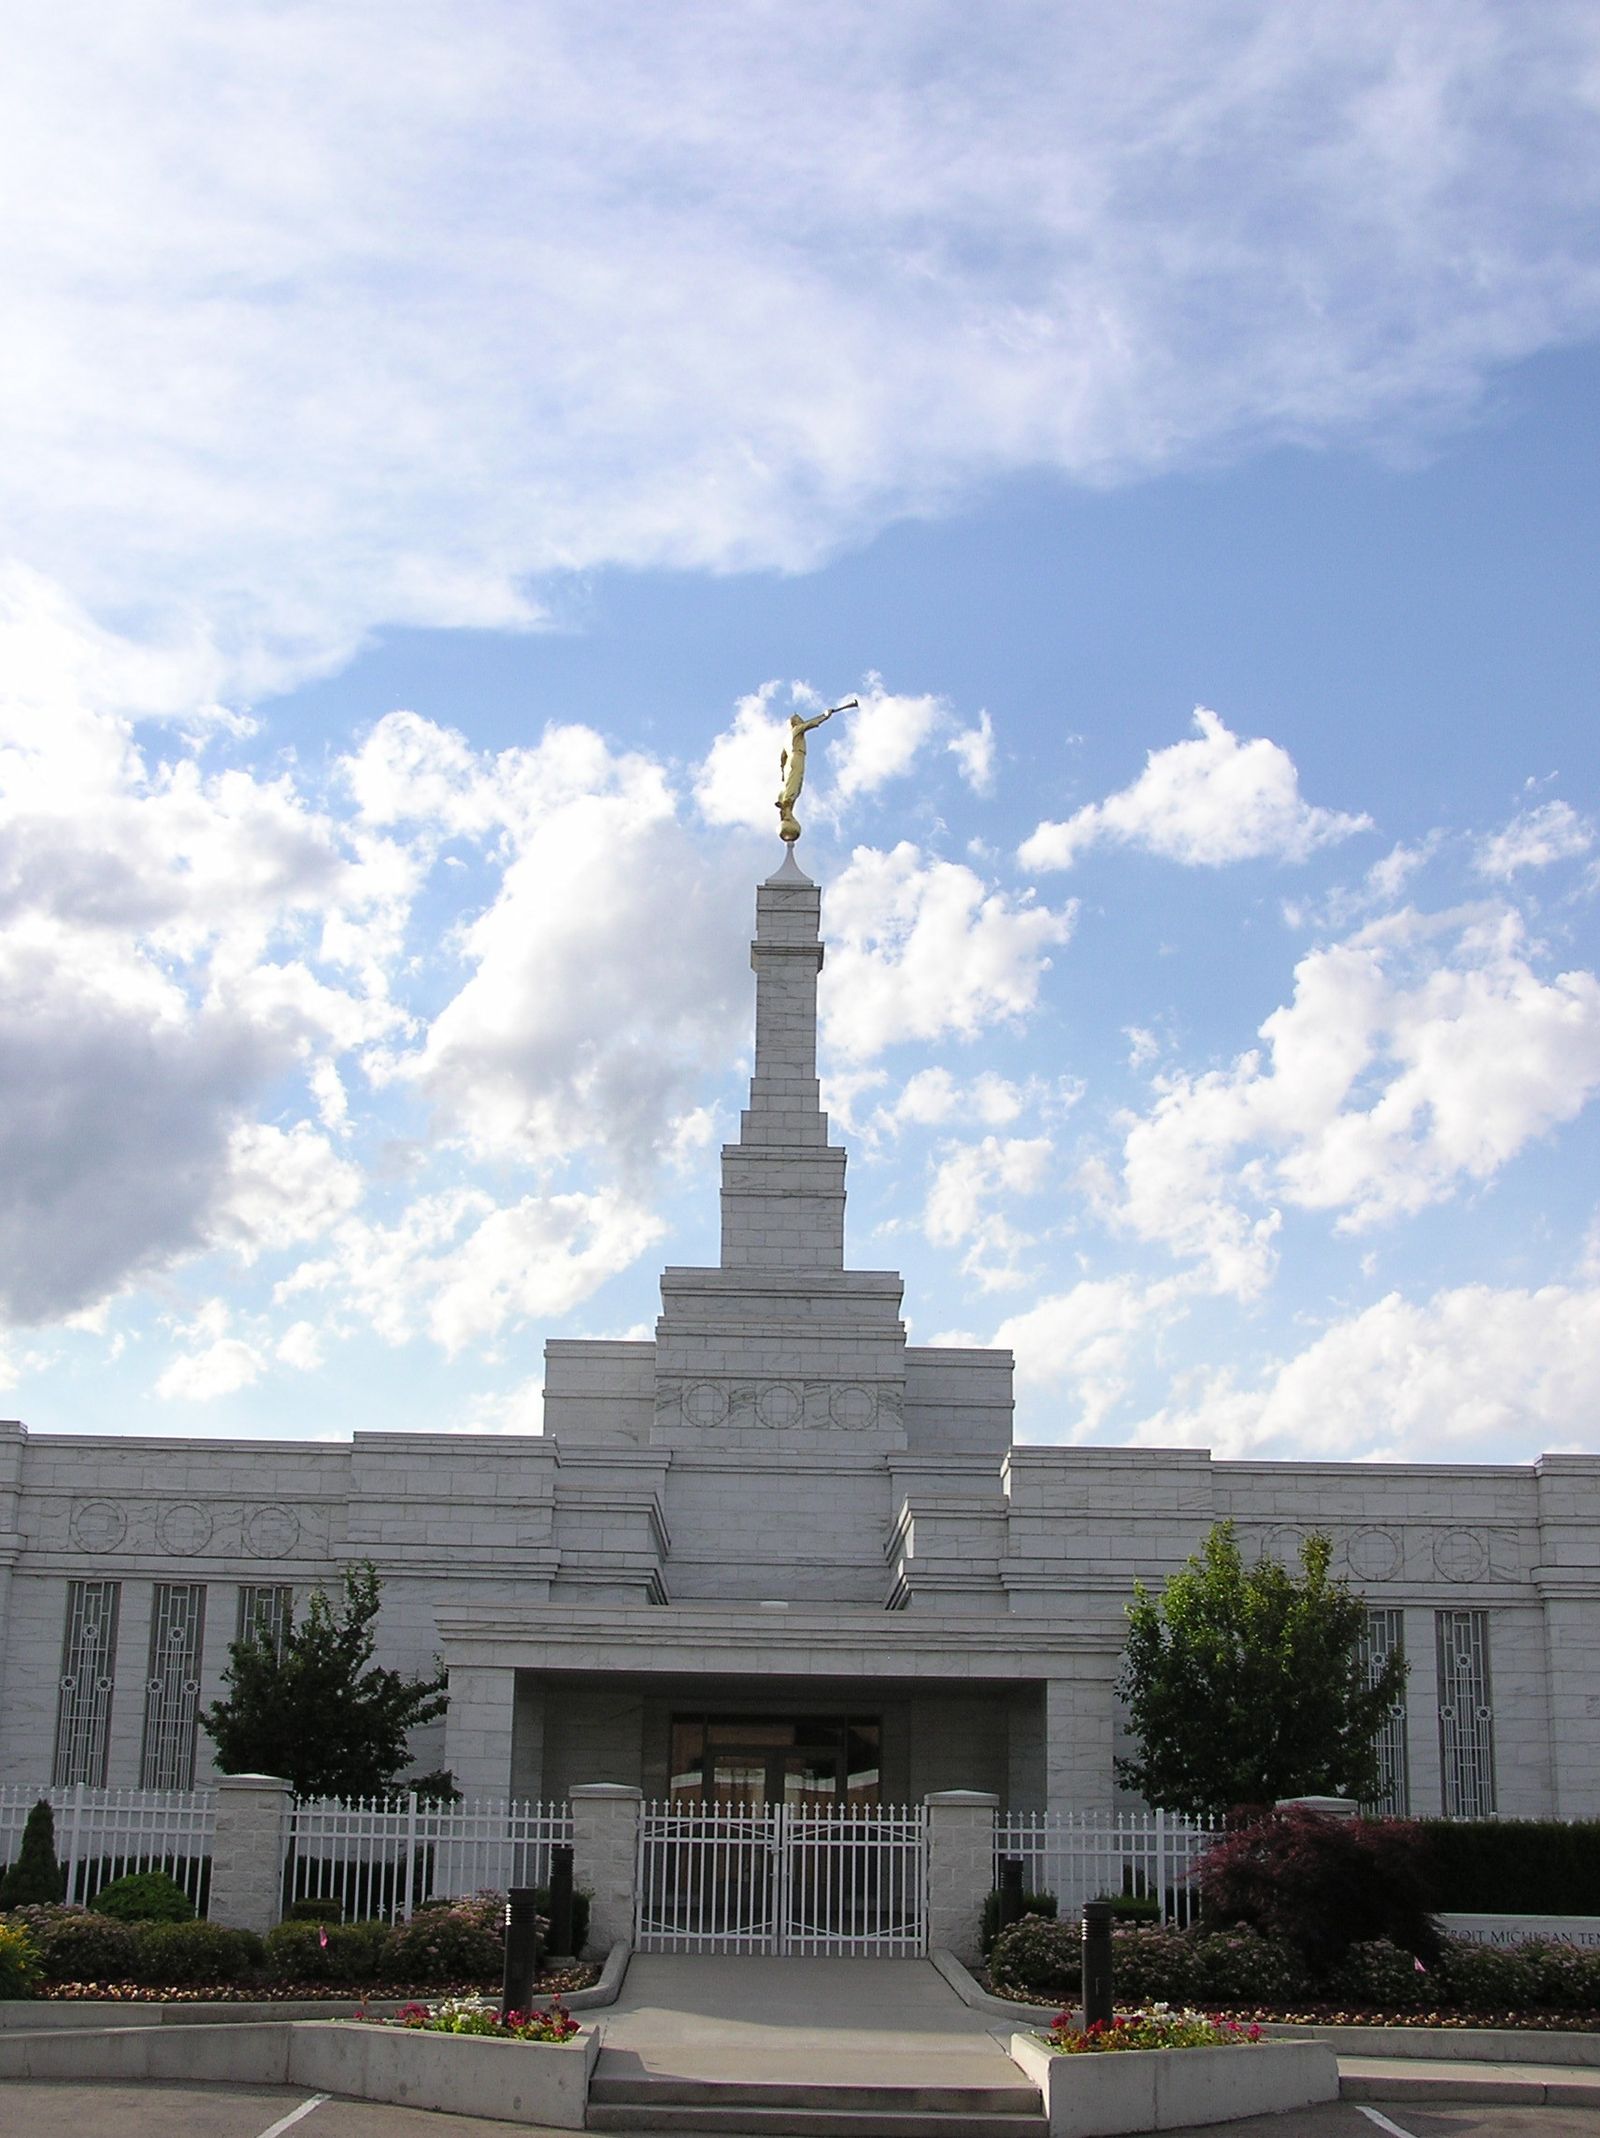 A portrait view of the entrance of the Detroit Michigan Temple.